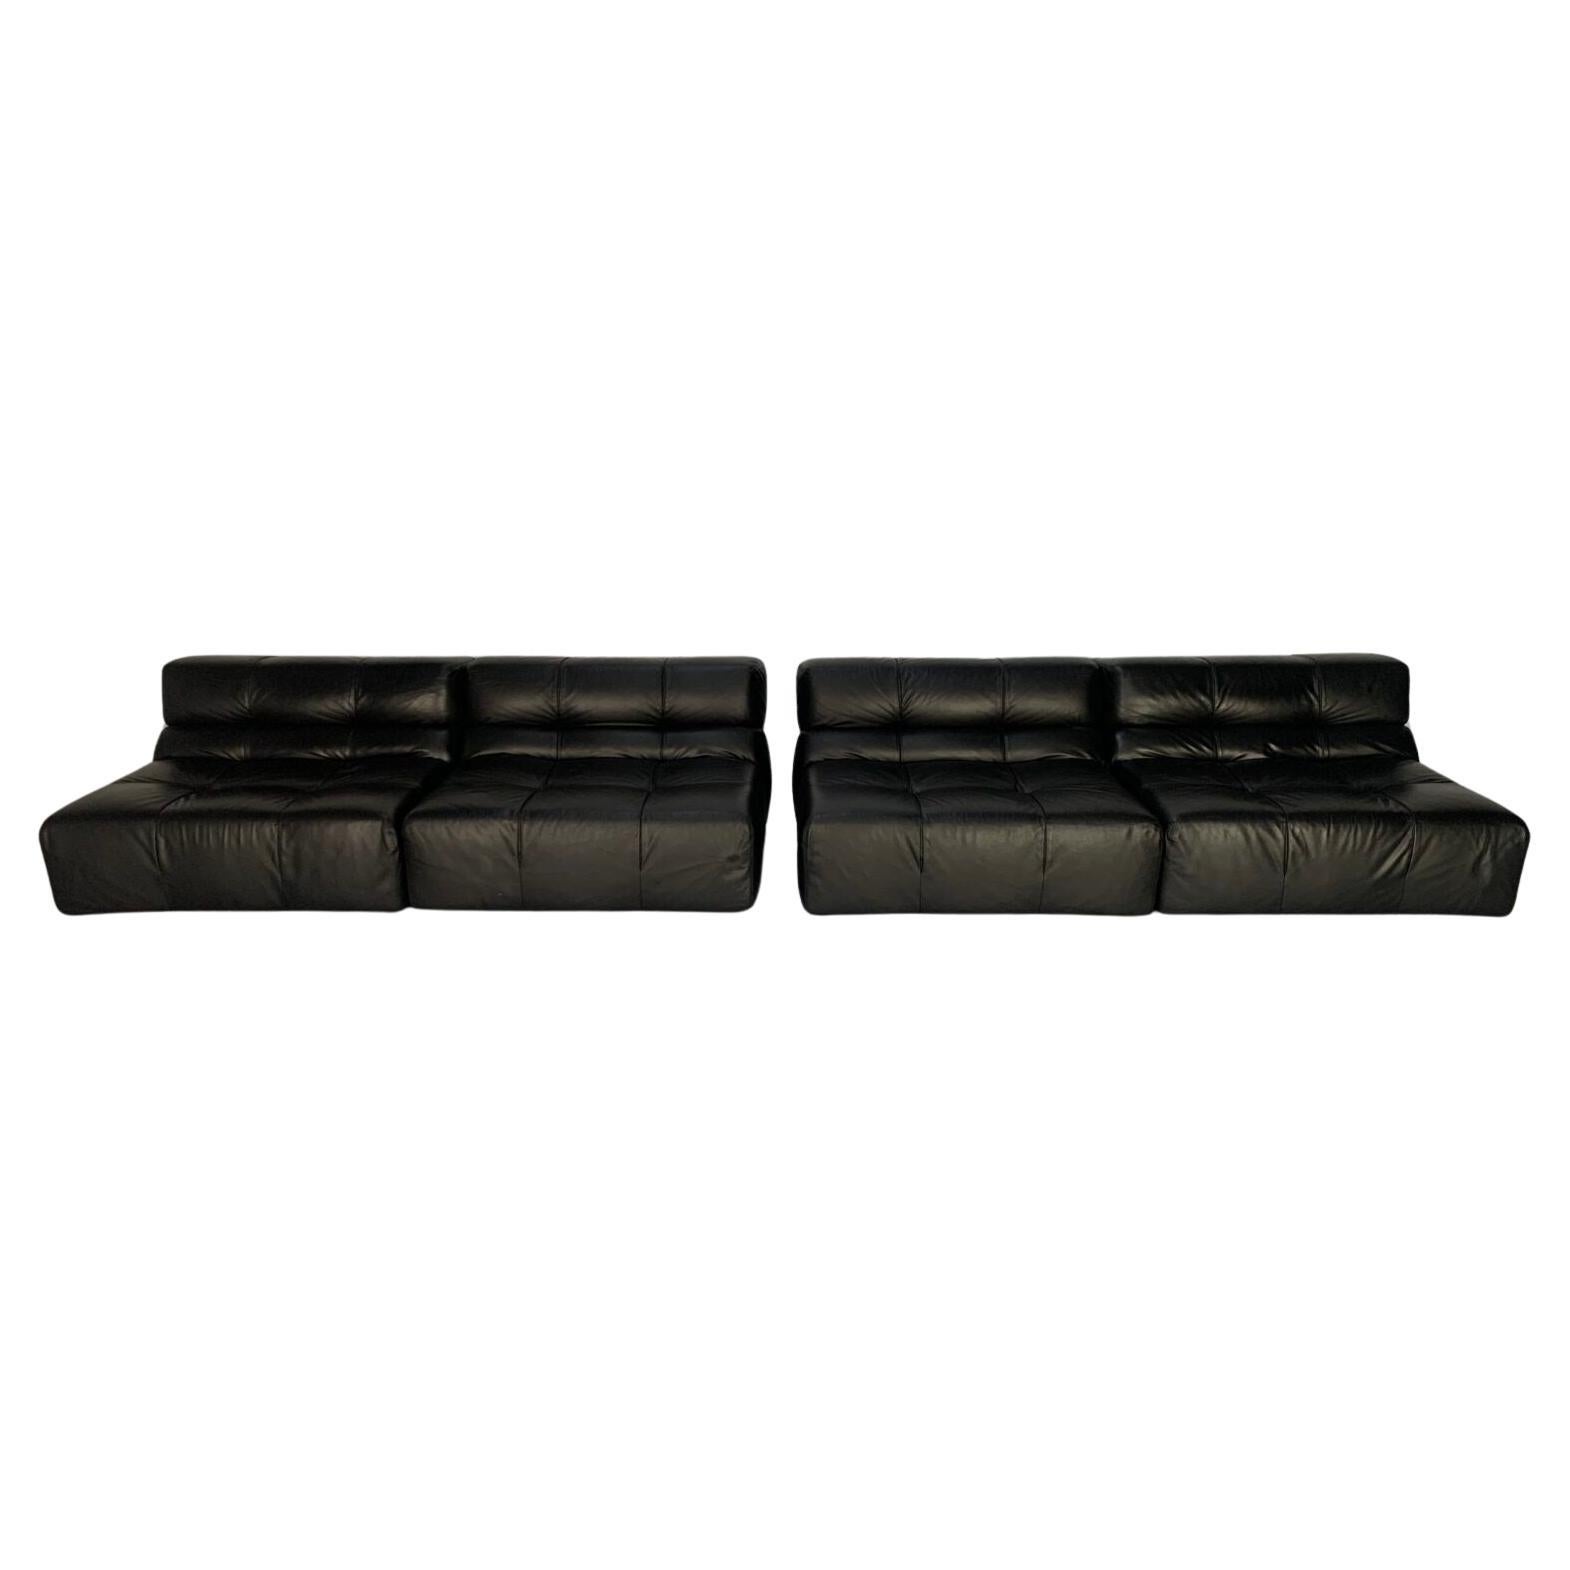 Pair of B&B Italia "Tufty Time" Sofas - In Black Leather For Sale